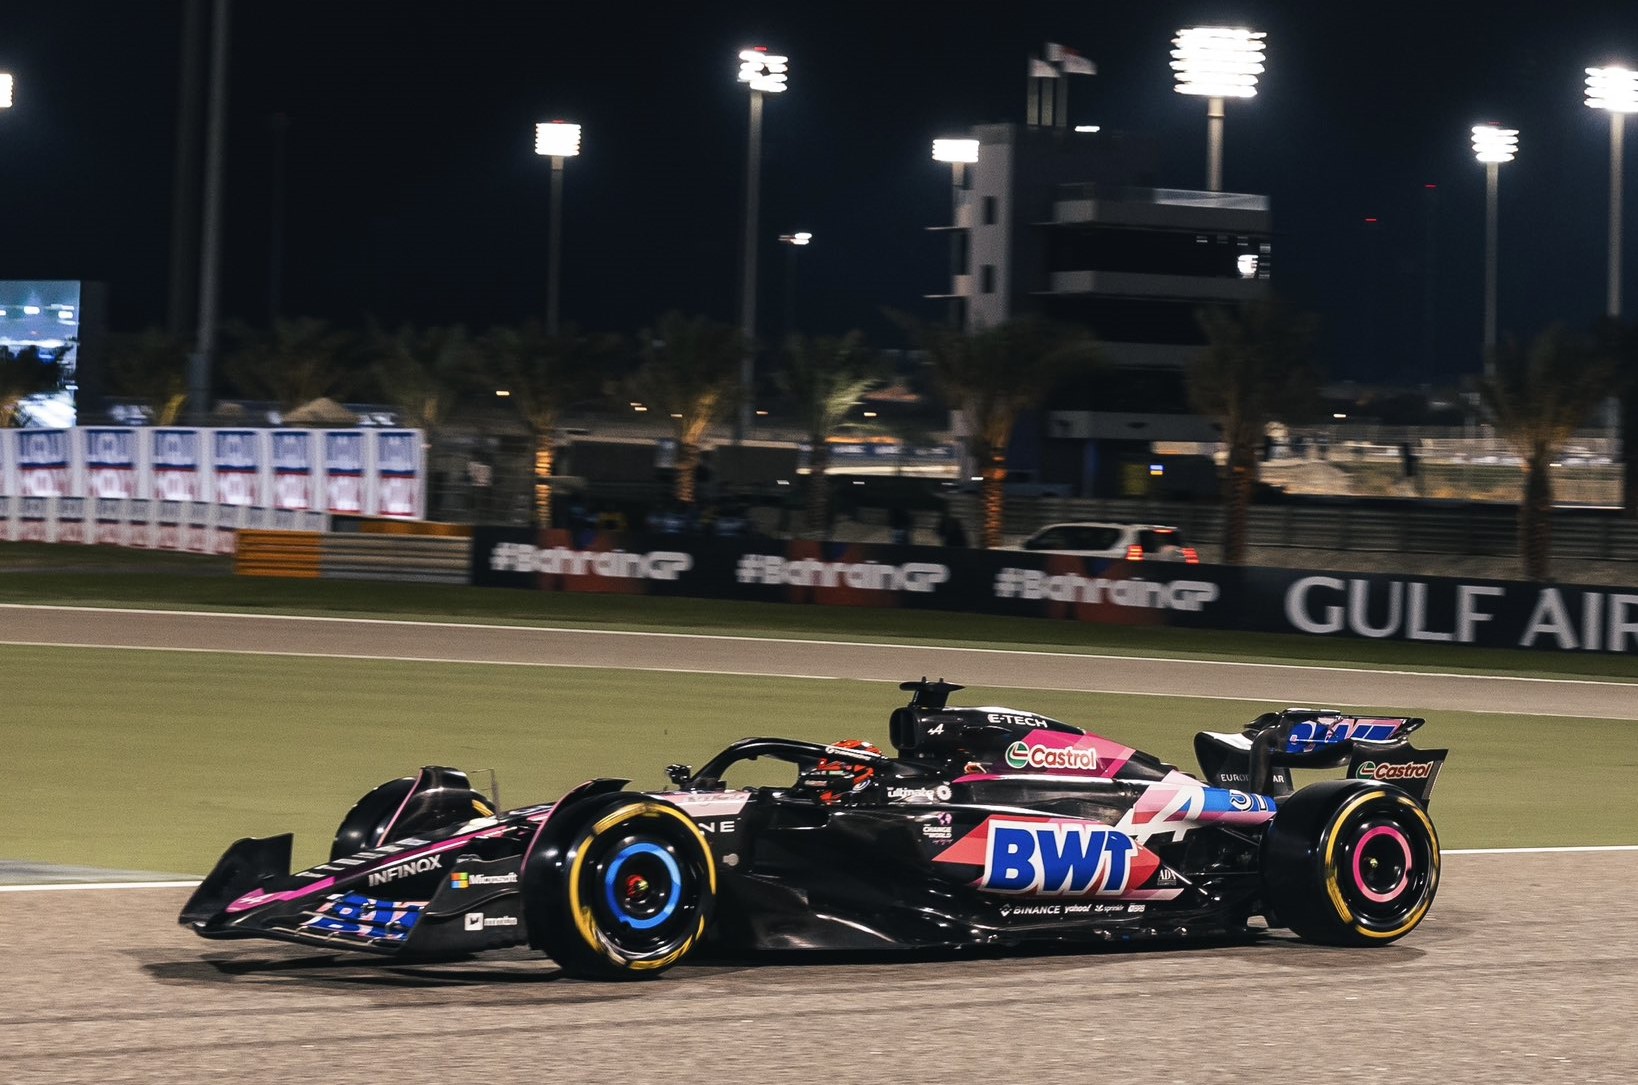 Executives quit F1 team Alpine after car's disappointing performance in  Bahrain Grand Prix, Sports